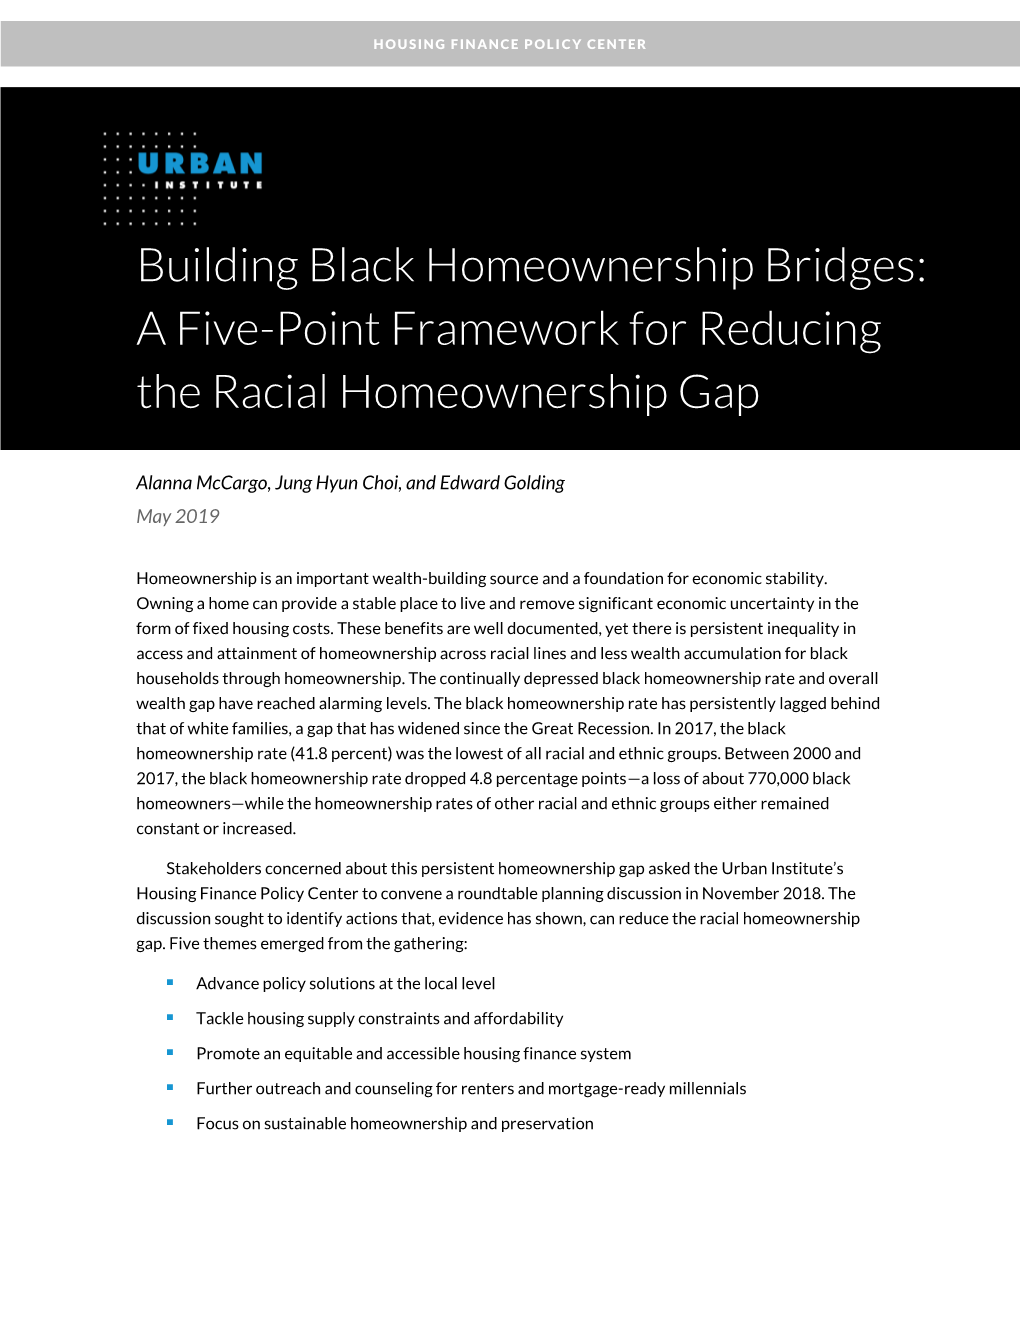 A Five-Point Framework for Reducing the Racial Homeownership Gap